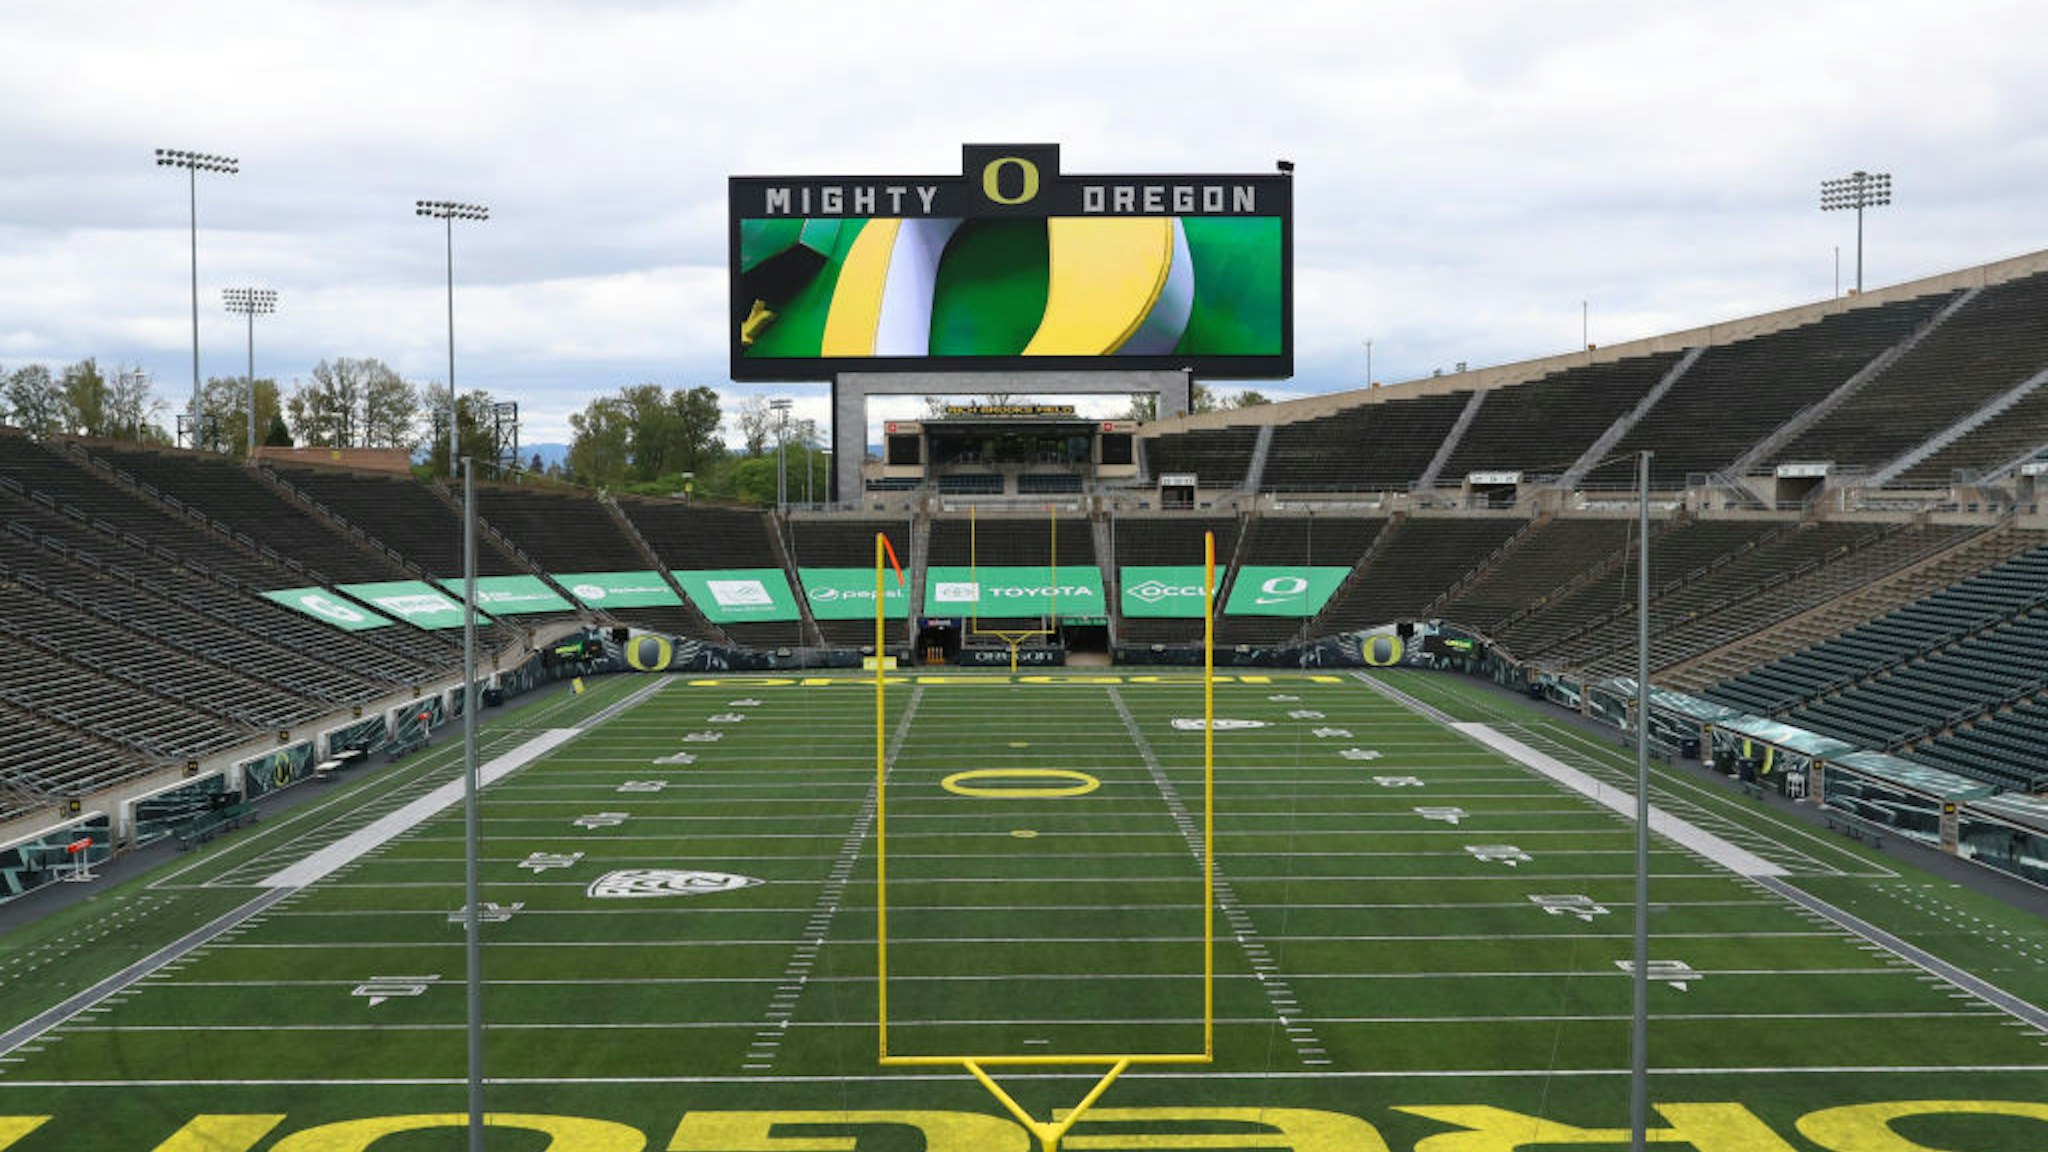 EUGENE, OREGON - MAY 01: A general view of Autzen Stadium on May 01, 2021 in Eugene, Oregon. (Photo by Abbie Parr/Getty Images)